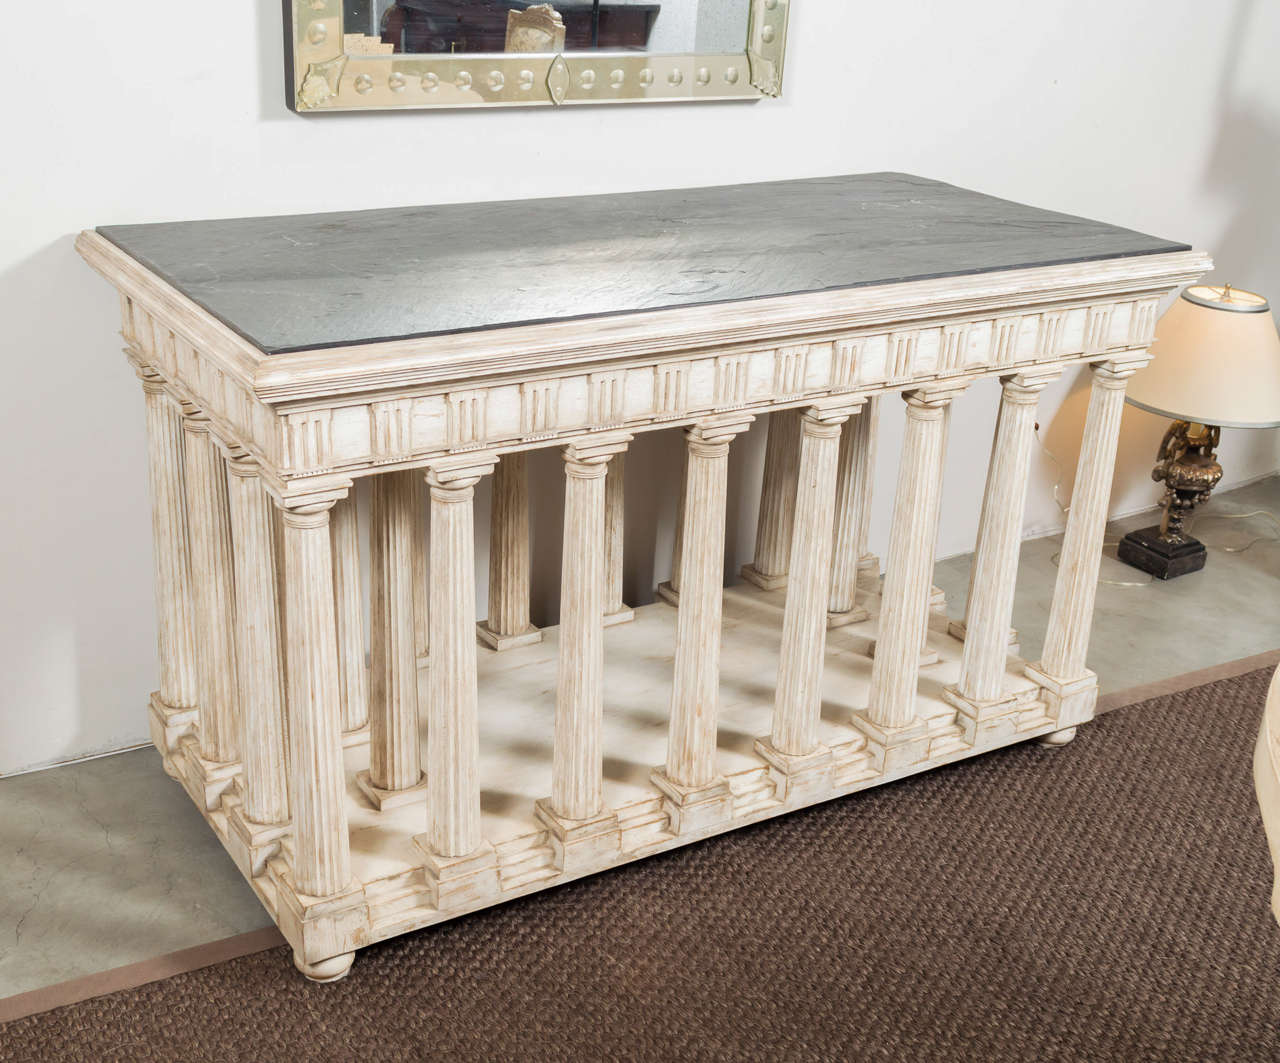 Hand-painted and antiqued slate top architectural center table. Rectangular charcoal slate top raised on a base in the form of a classical temple, the frieze of traditional form with triglyphs and metopes raised on a series of fluted Doric column